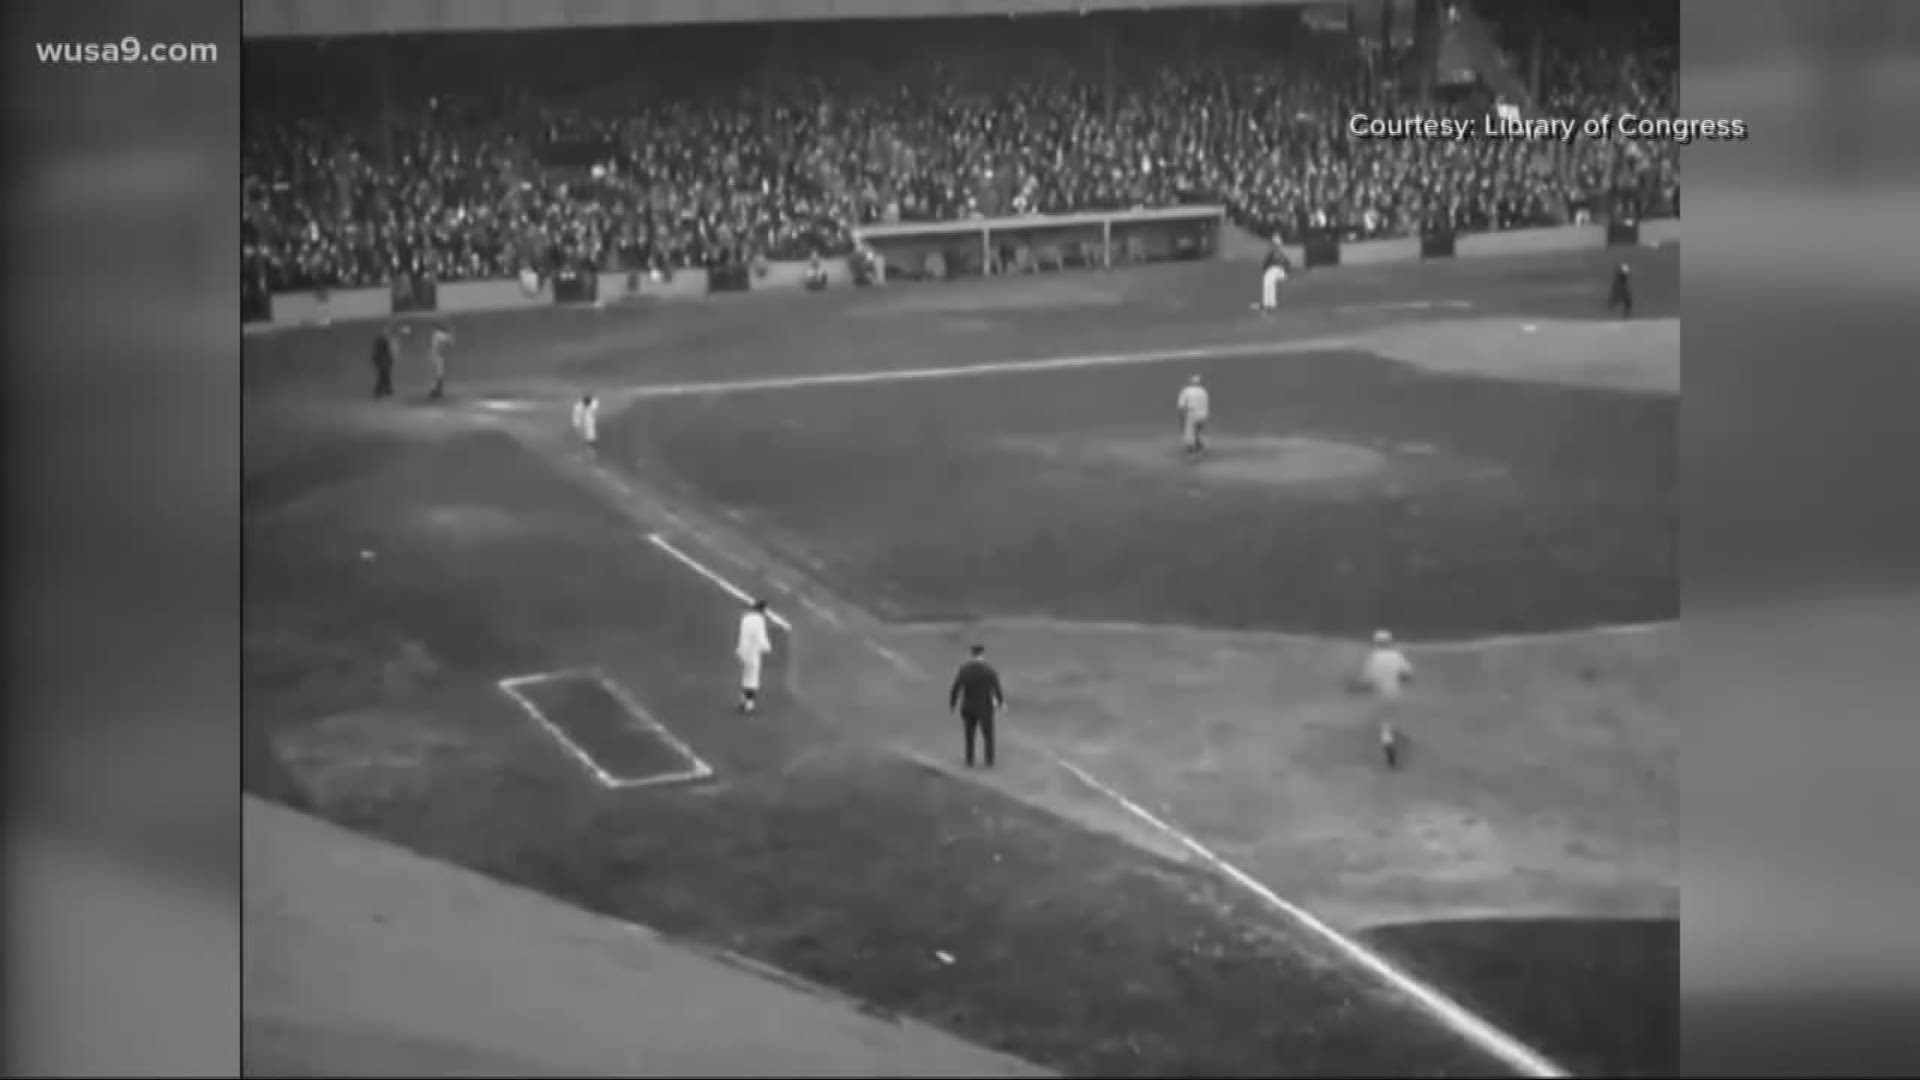 The Senators learn to survive during 1924 World Series